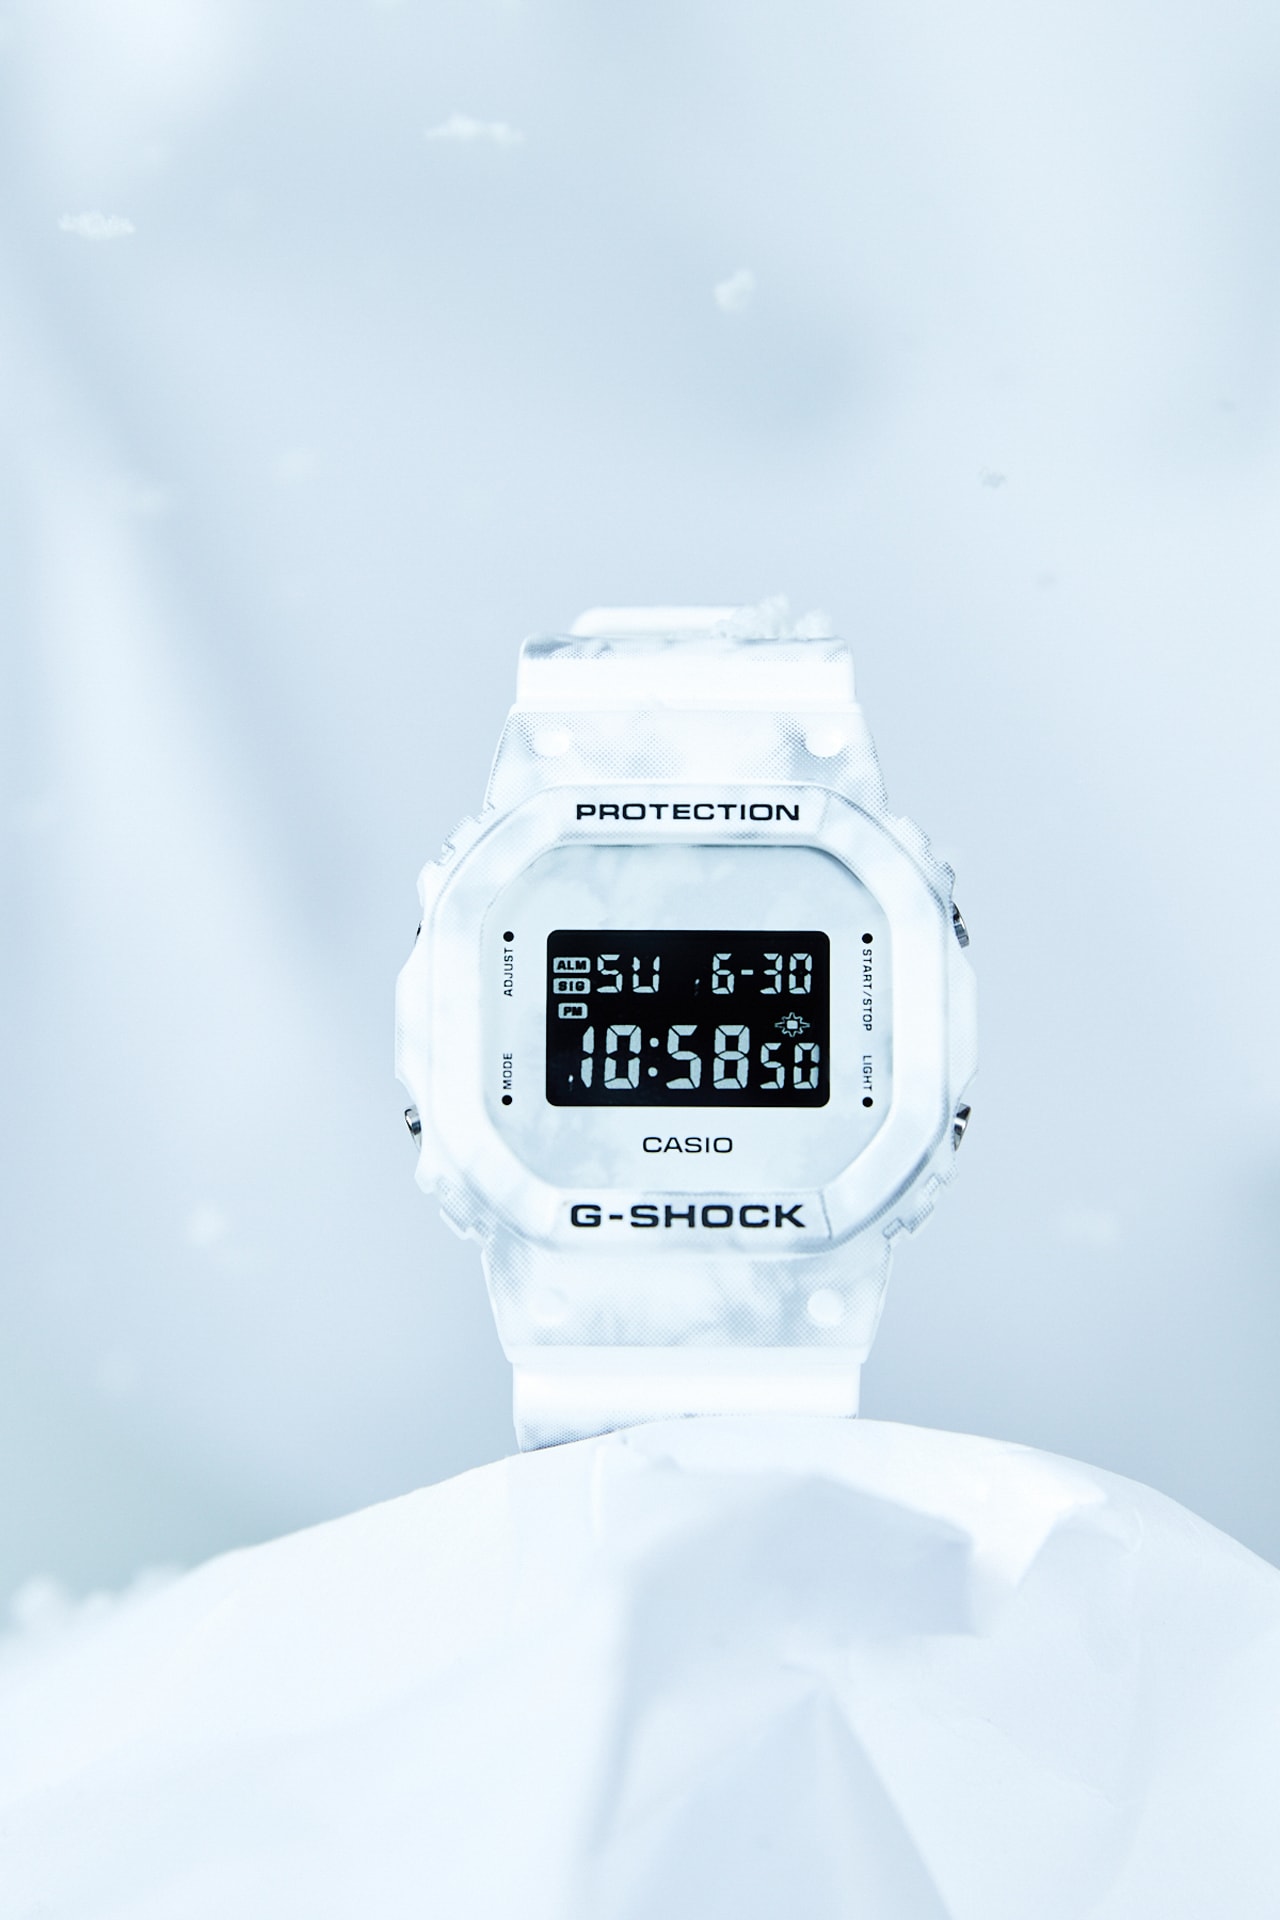 Gショックが新たなカモフラージュシリーズを発売 G-shock four new models octagonal GAE-2100, the square case DW-5600, the sporty analog-digital combination GA-2200 and the rugged and powerful Ga-900 snow camouflage design DW5600GC-7 GA2200GC-7A  GA900GC-7A GAE2100GC-7A winter wear outwear sportswear all-white base styles